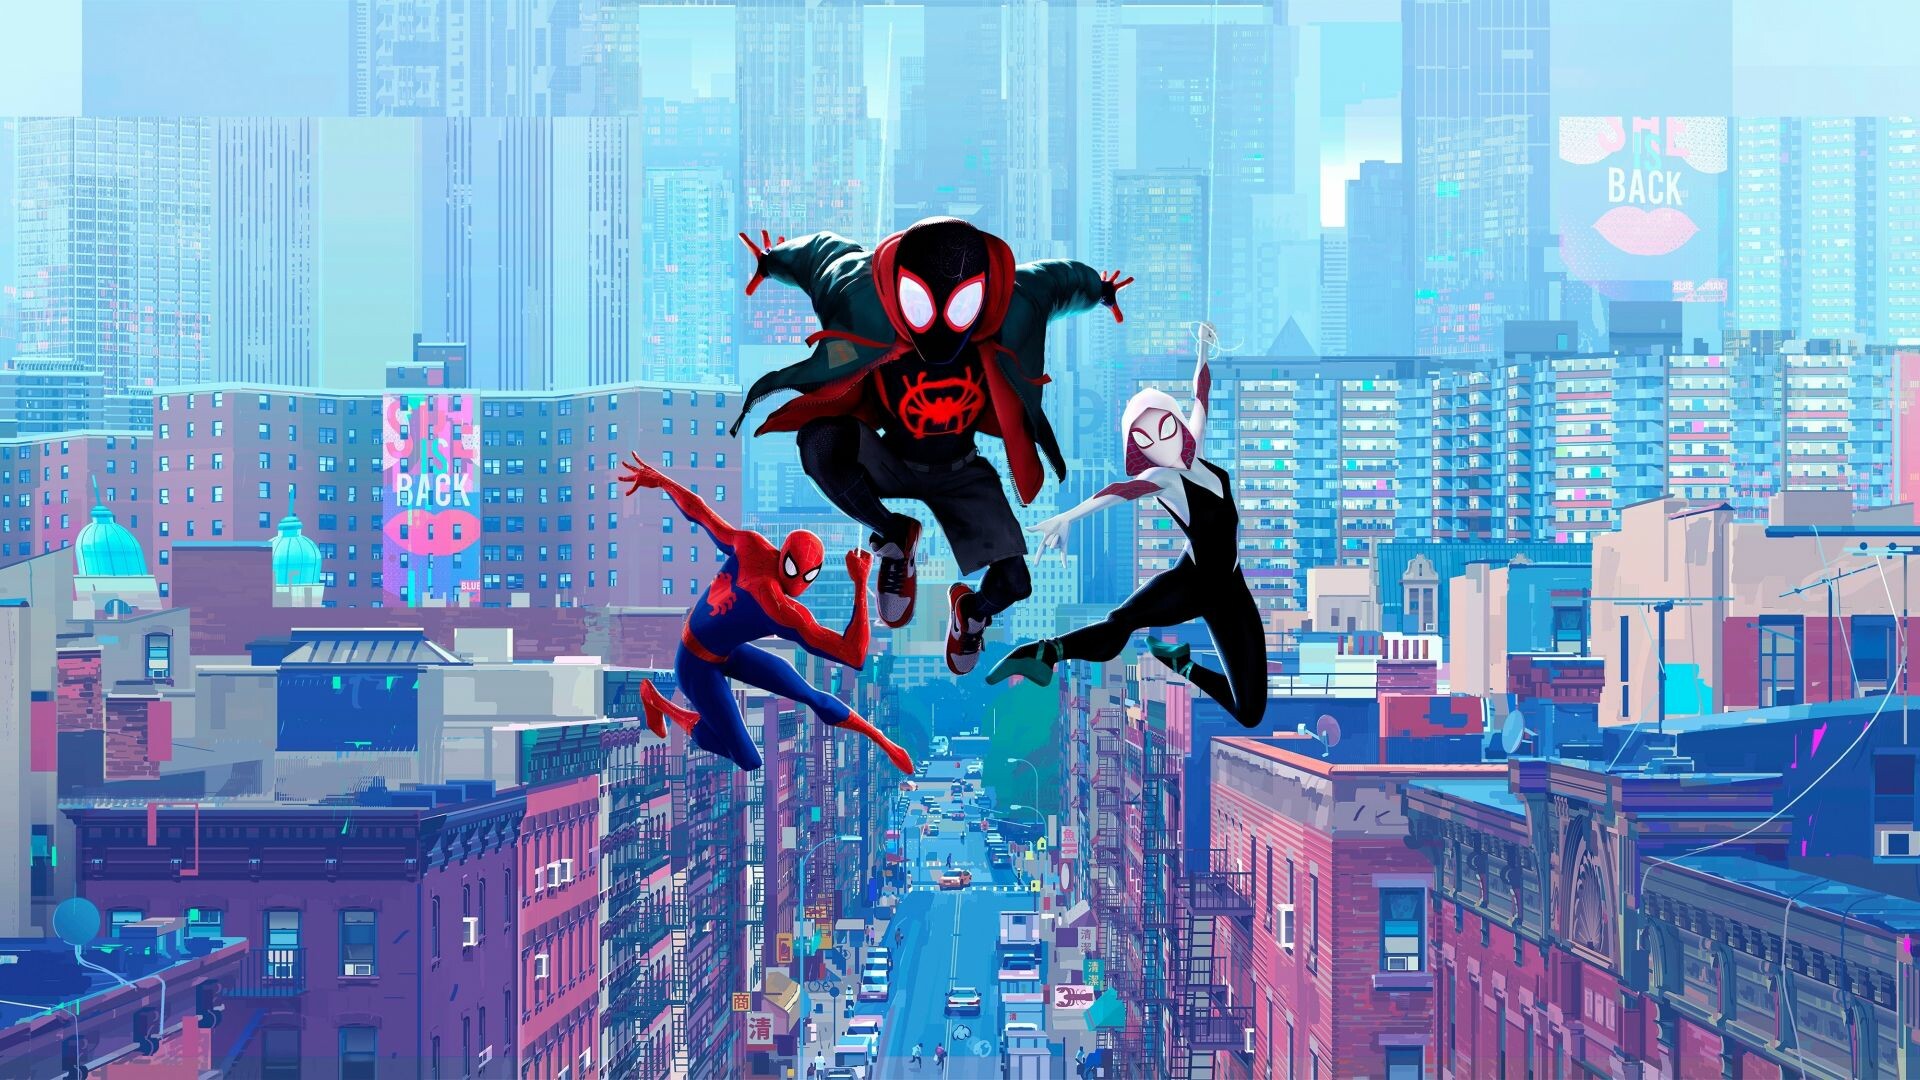 Spider-Man: Into the Spider-Verse: The introductions sequences of Gwen Stacy, Peter Parker and Peter B. Parker include artwork from actual comic books. 1920x1080 Full HD Wallpaper.